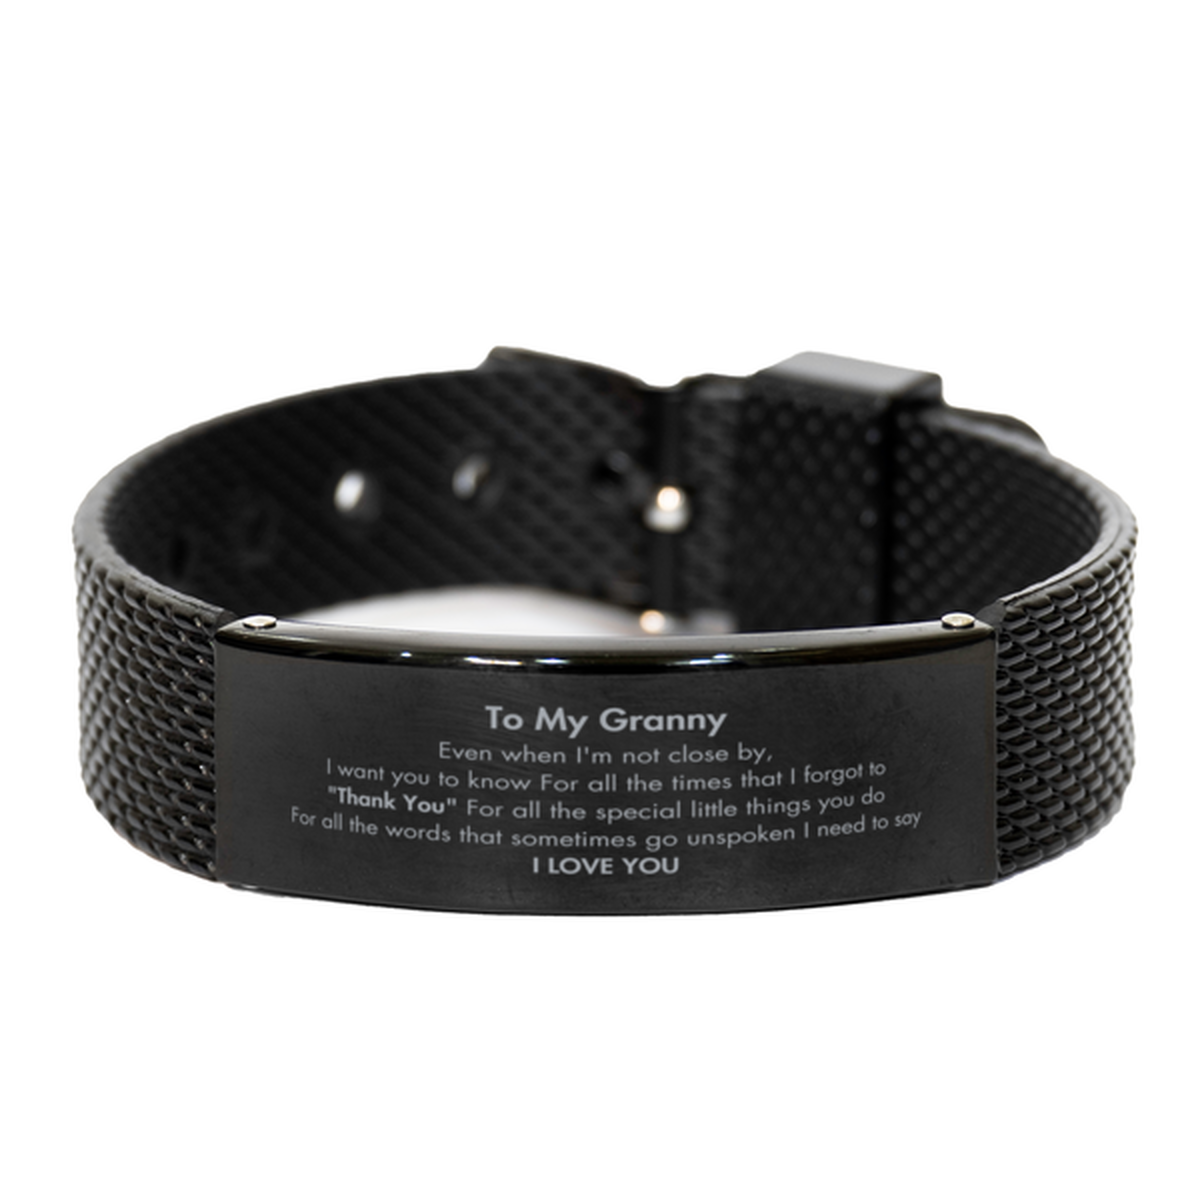 Thank You Gifts for Granny, Keepsake Black Shark Mesh Bracelet Gifts for Granny Birthday Mother's day Father's Day Granny For all the words That sometimes go unspoken I need to say I LOVE YOU